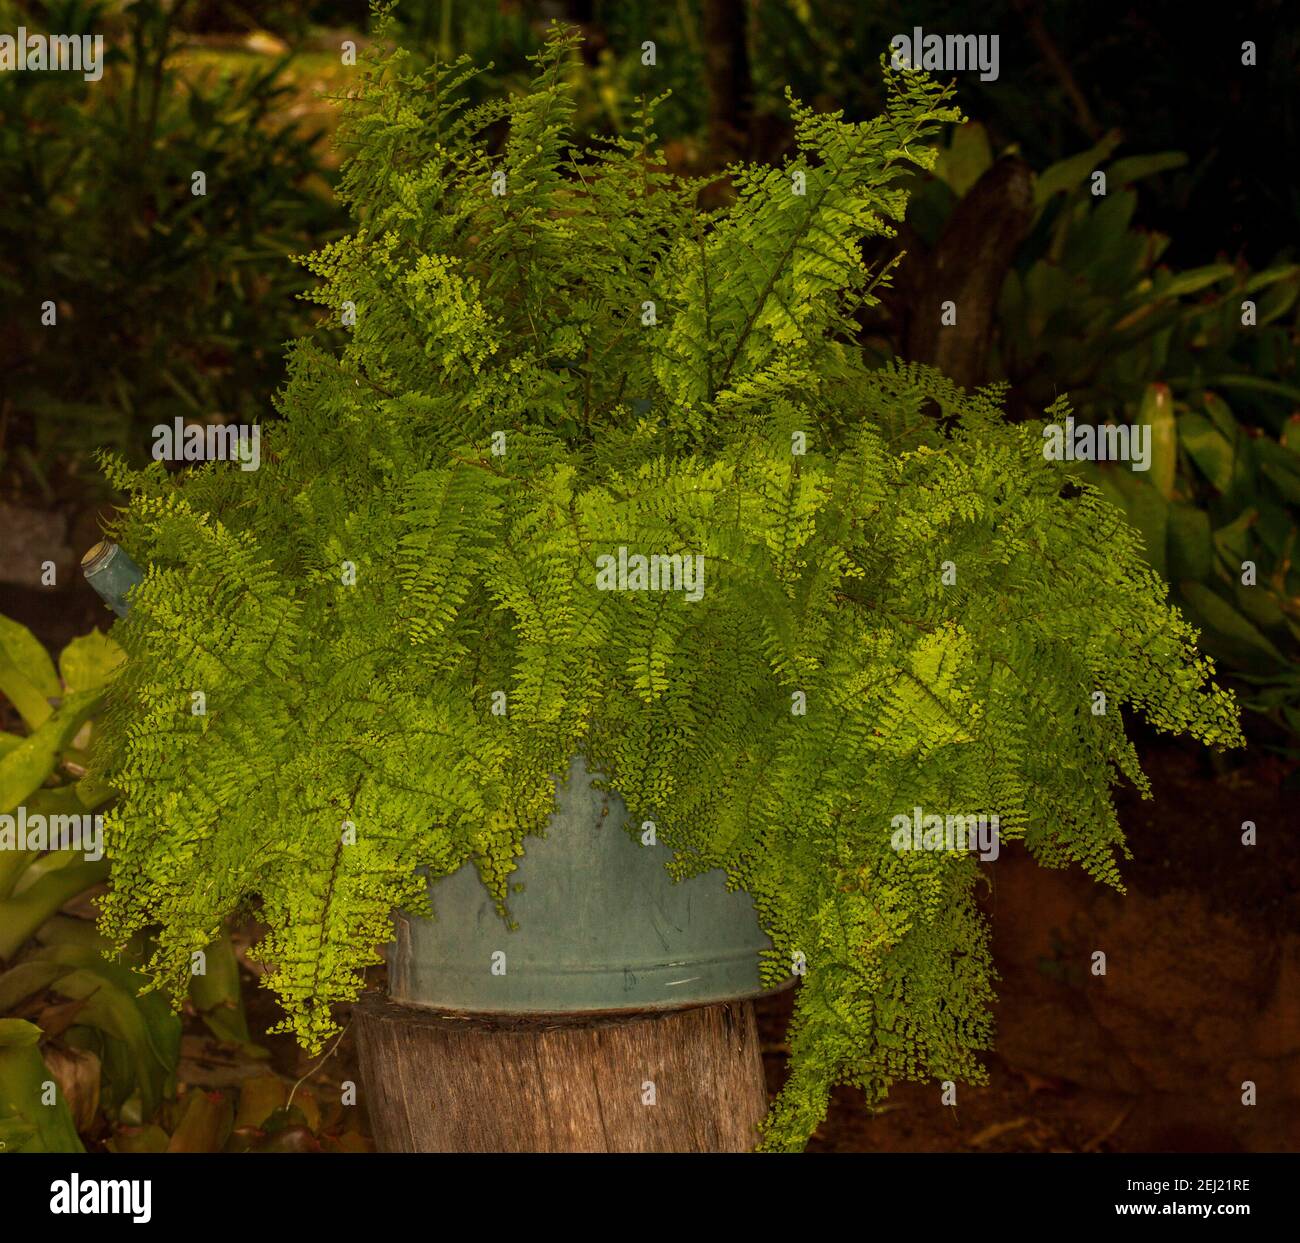 Vivid green Nephrolepsis fern with luxuriant  delicate lacy fronds, growing in a container, a recycled old metal watering can. Stock Photo